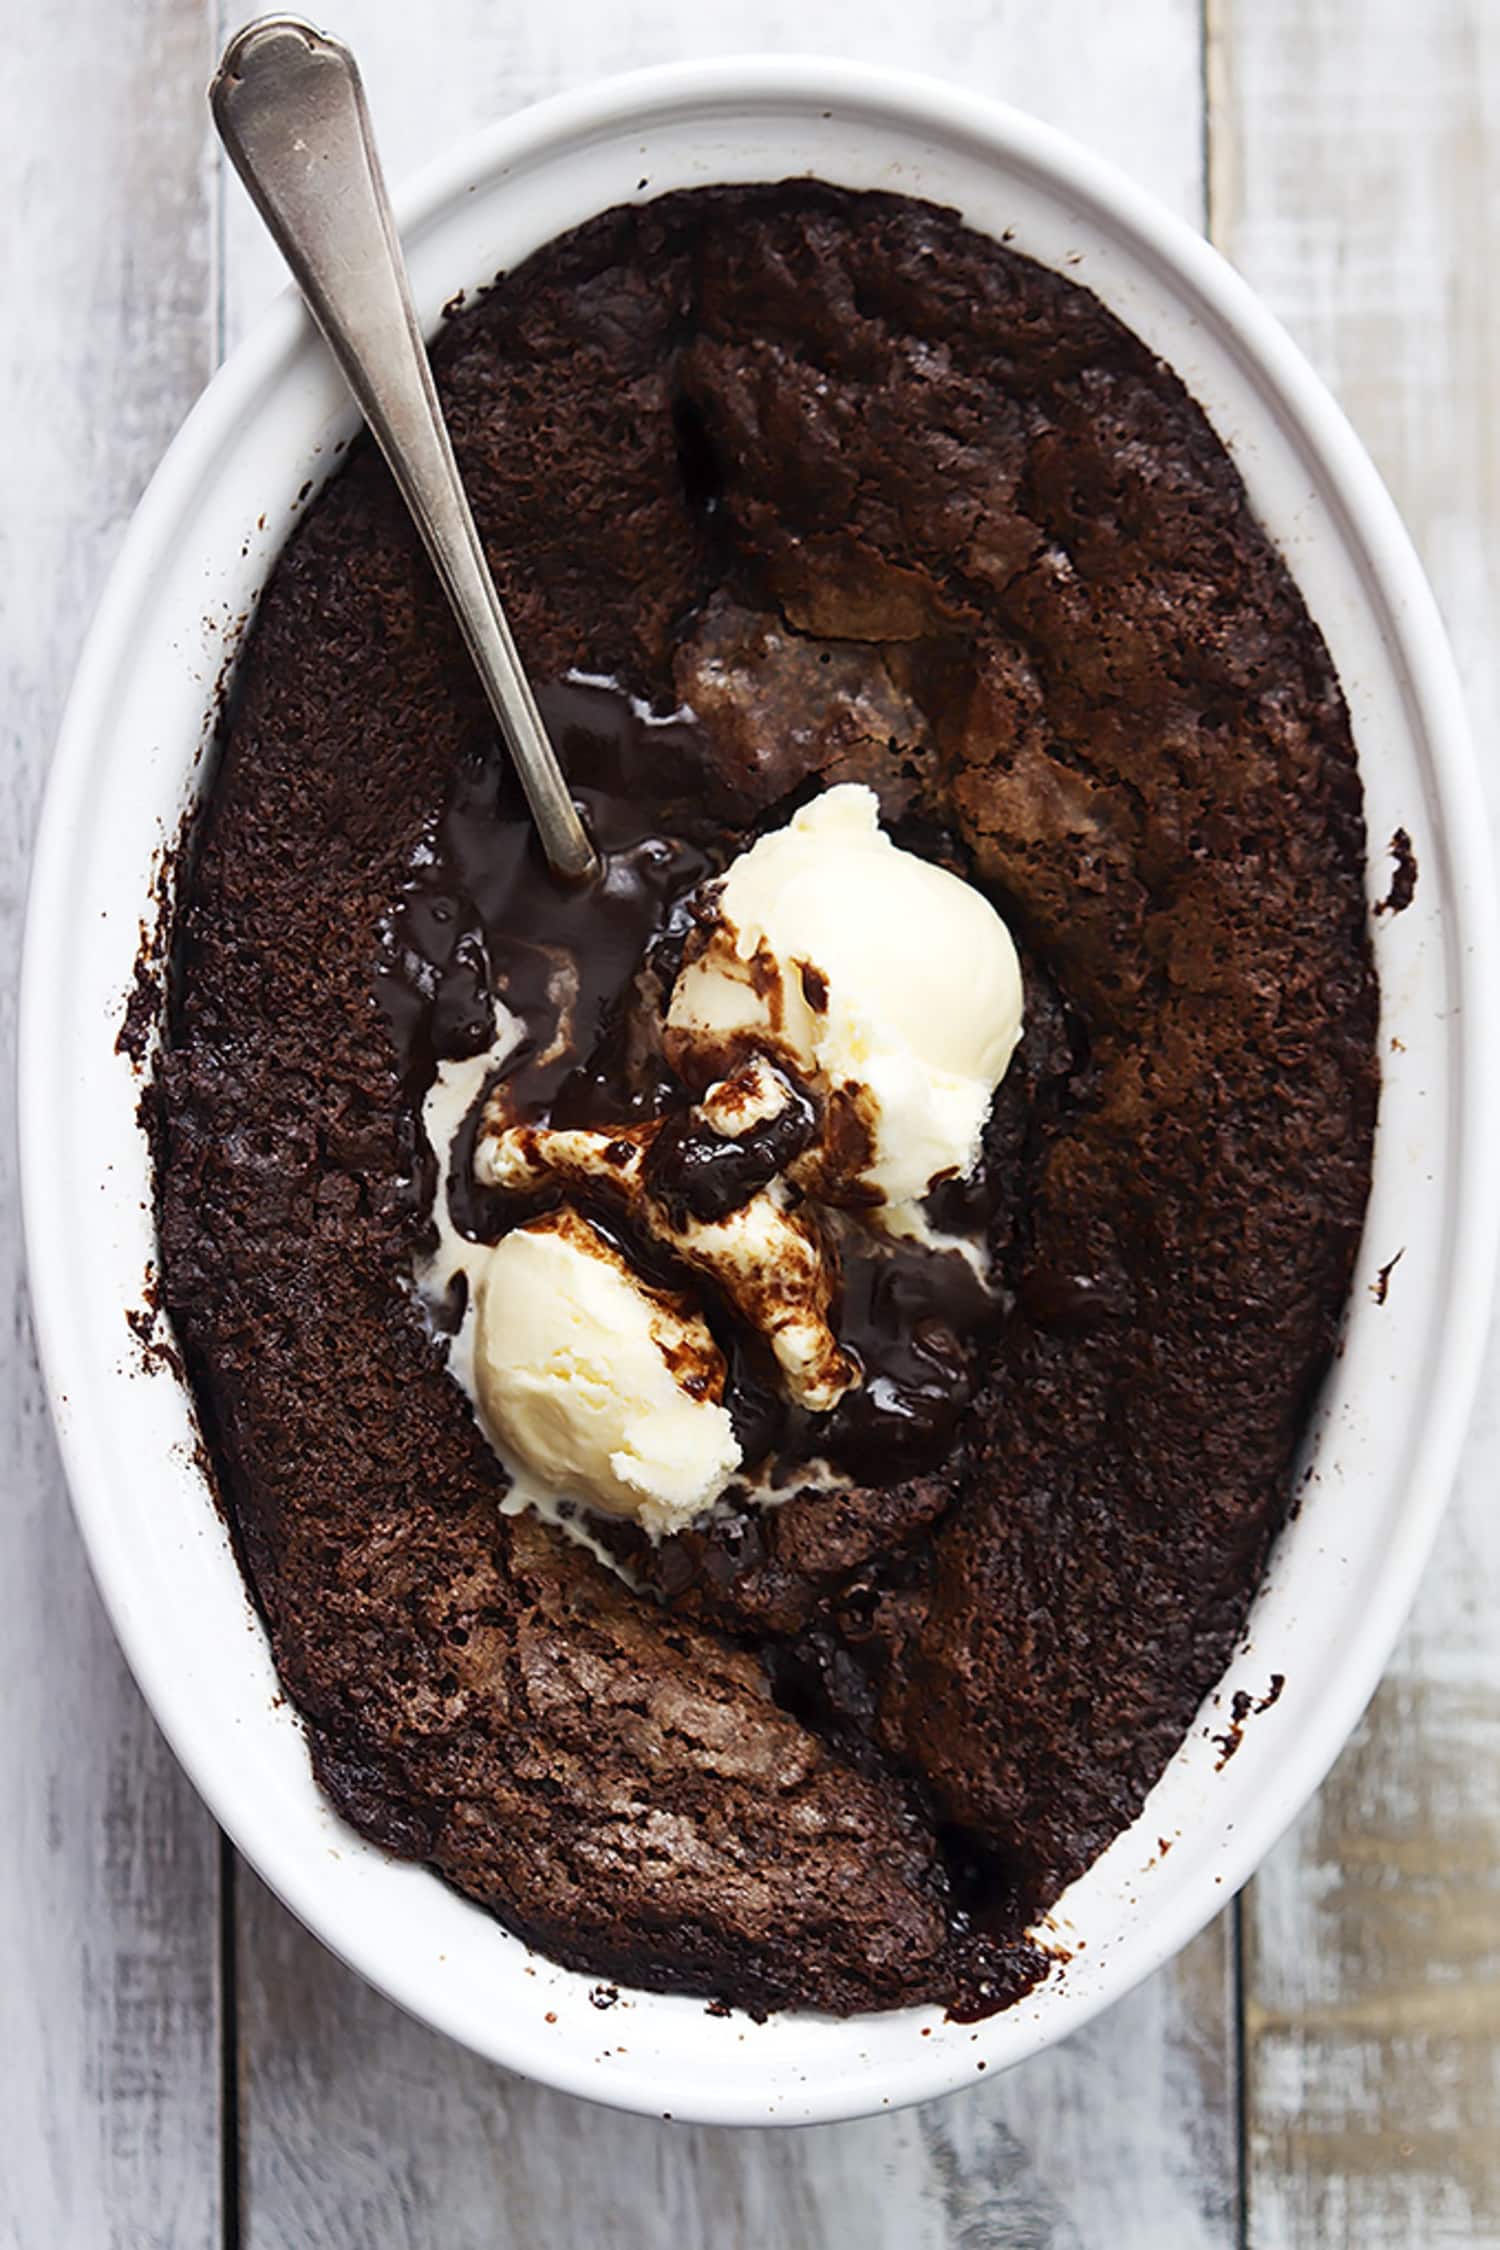 This Chocolate Cobbler Is What Dreams Are Made Of | Kitchn